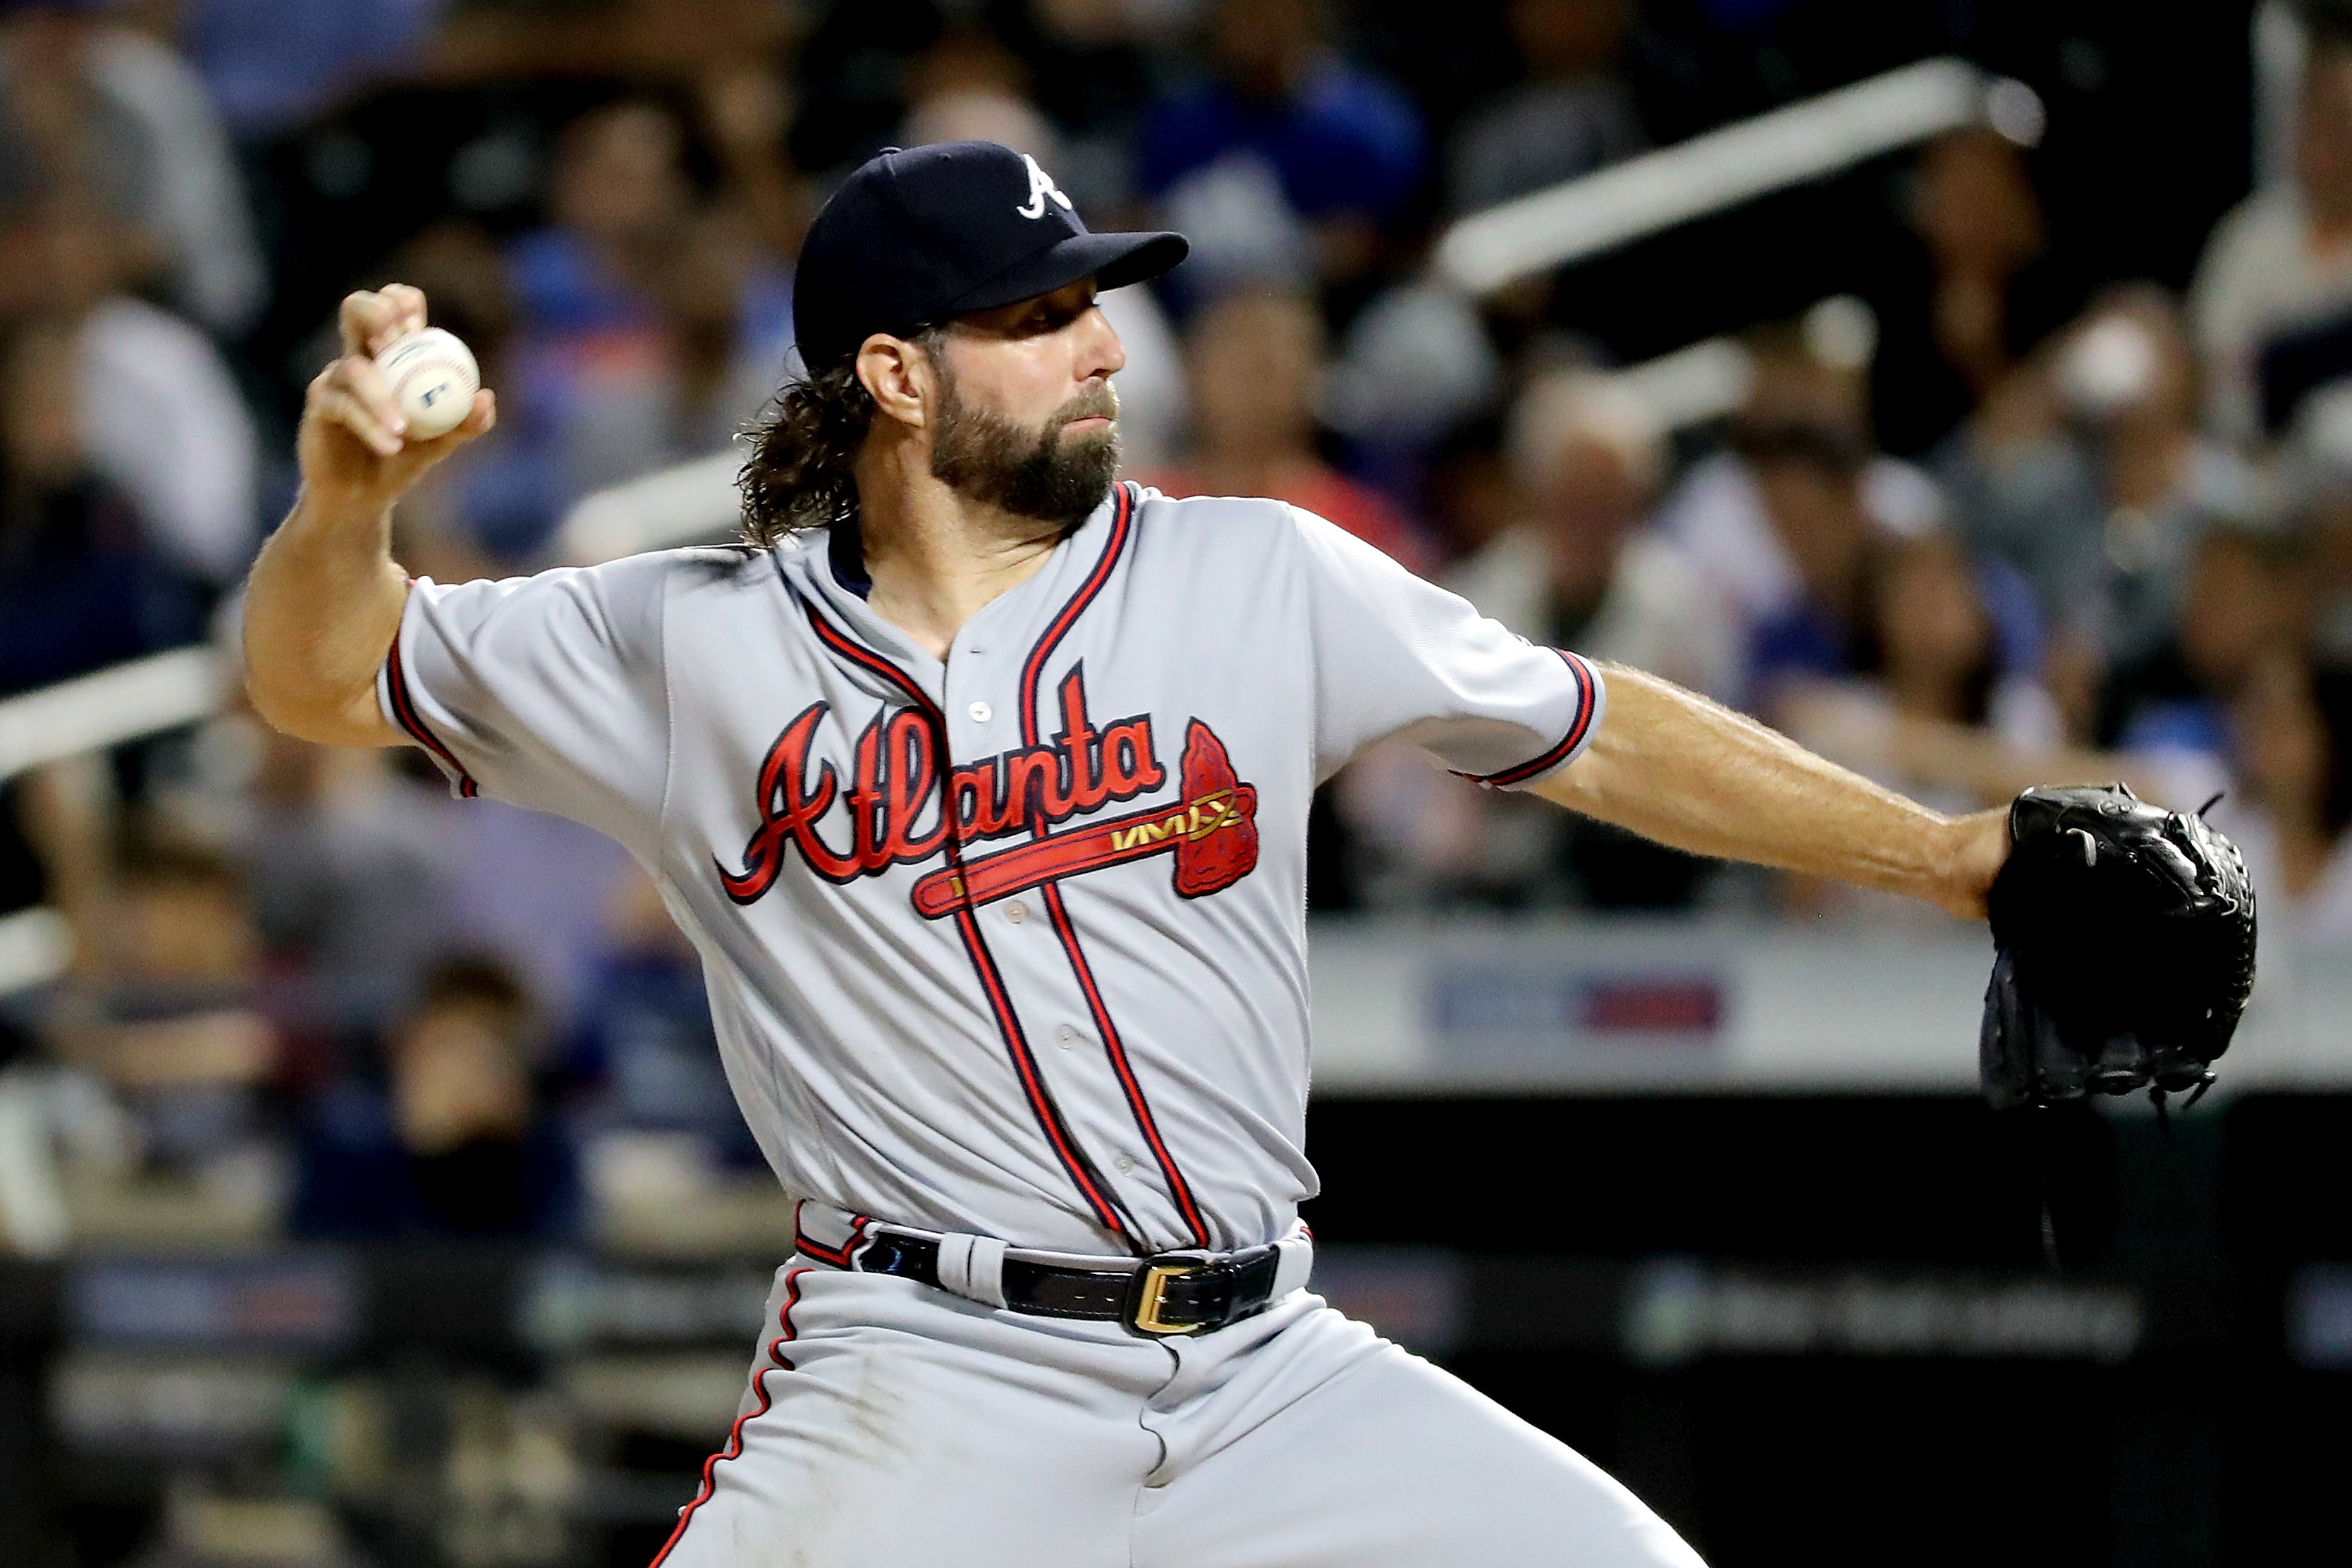 R.A. Dickey puts off retirement and signs one-year deal with Braves